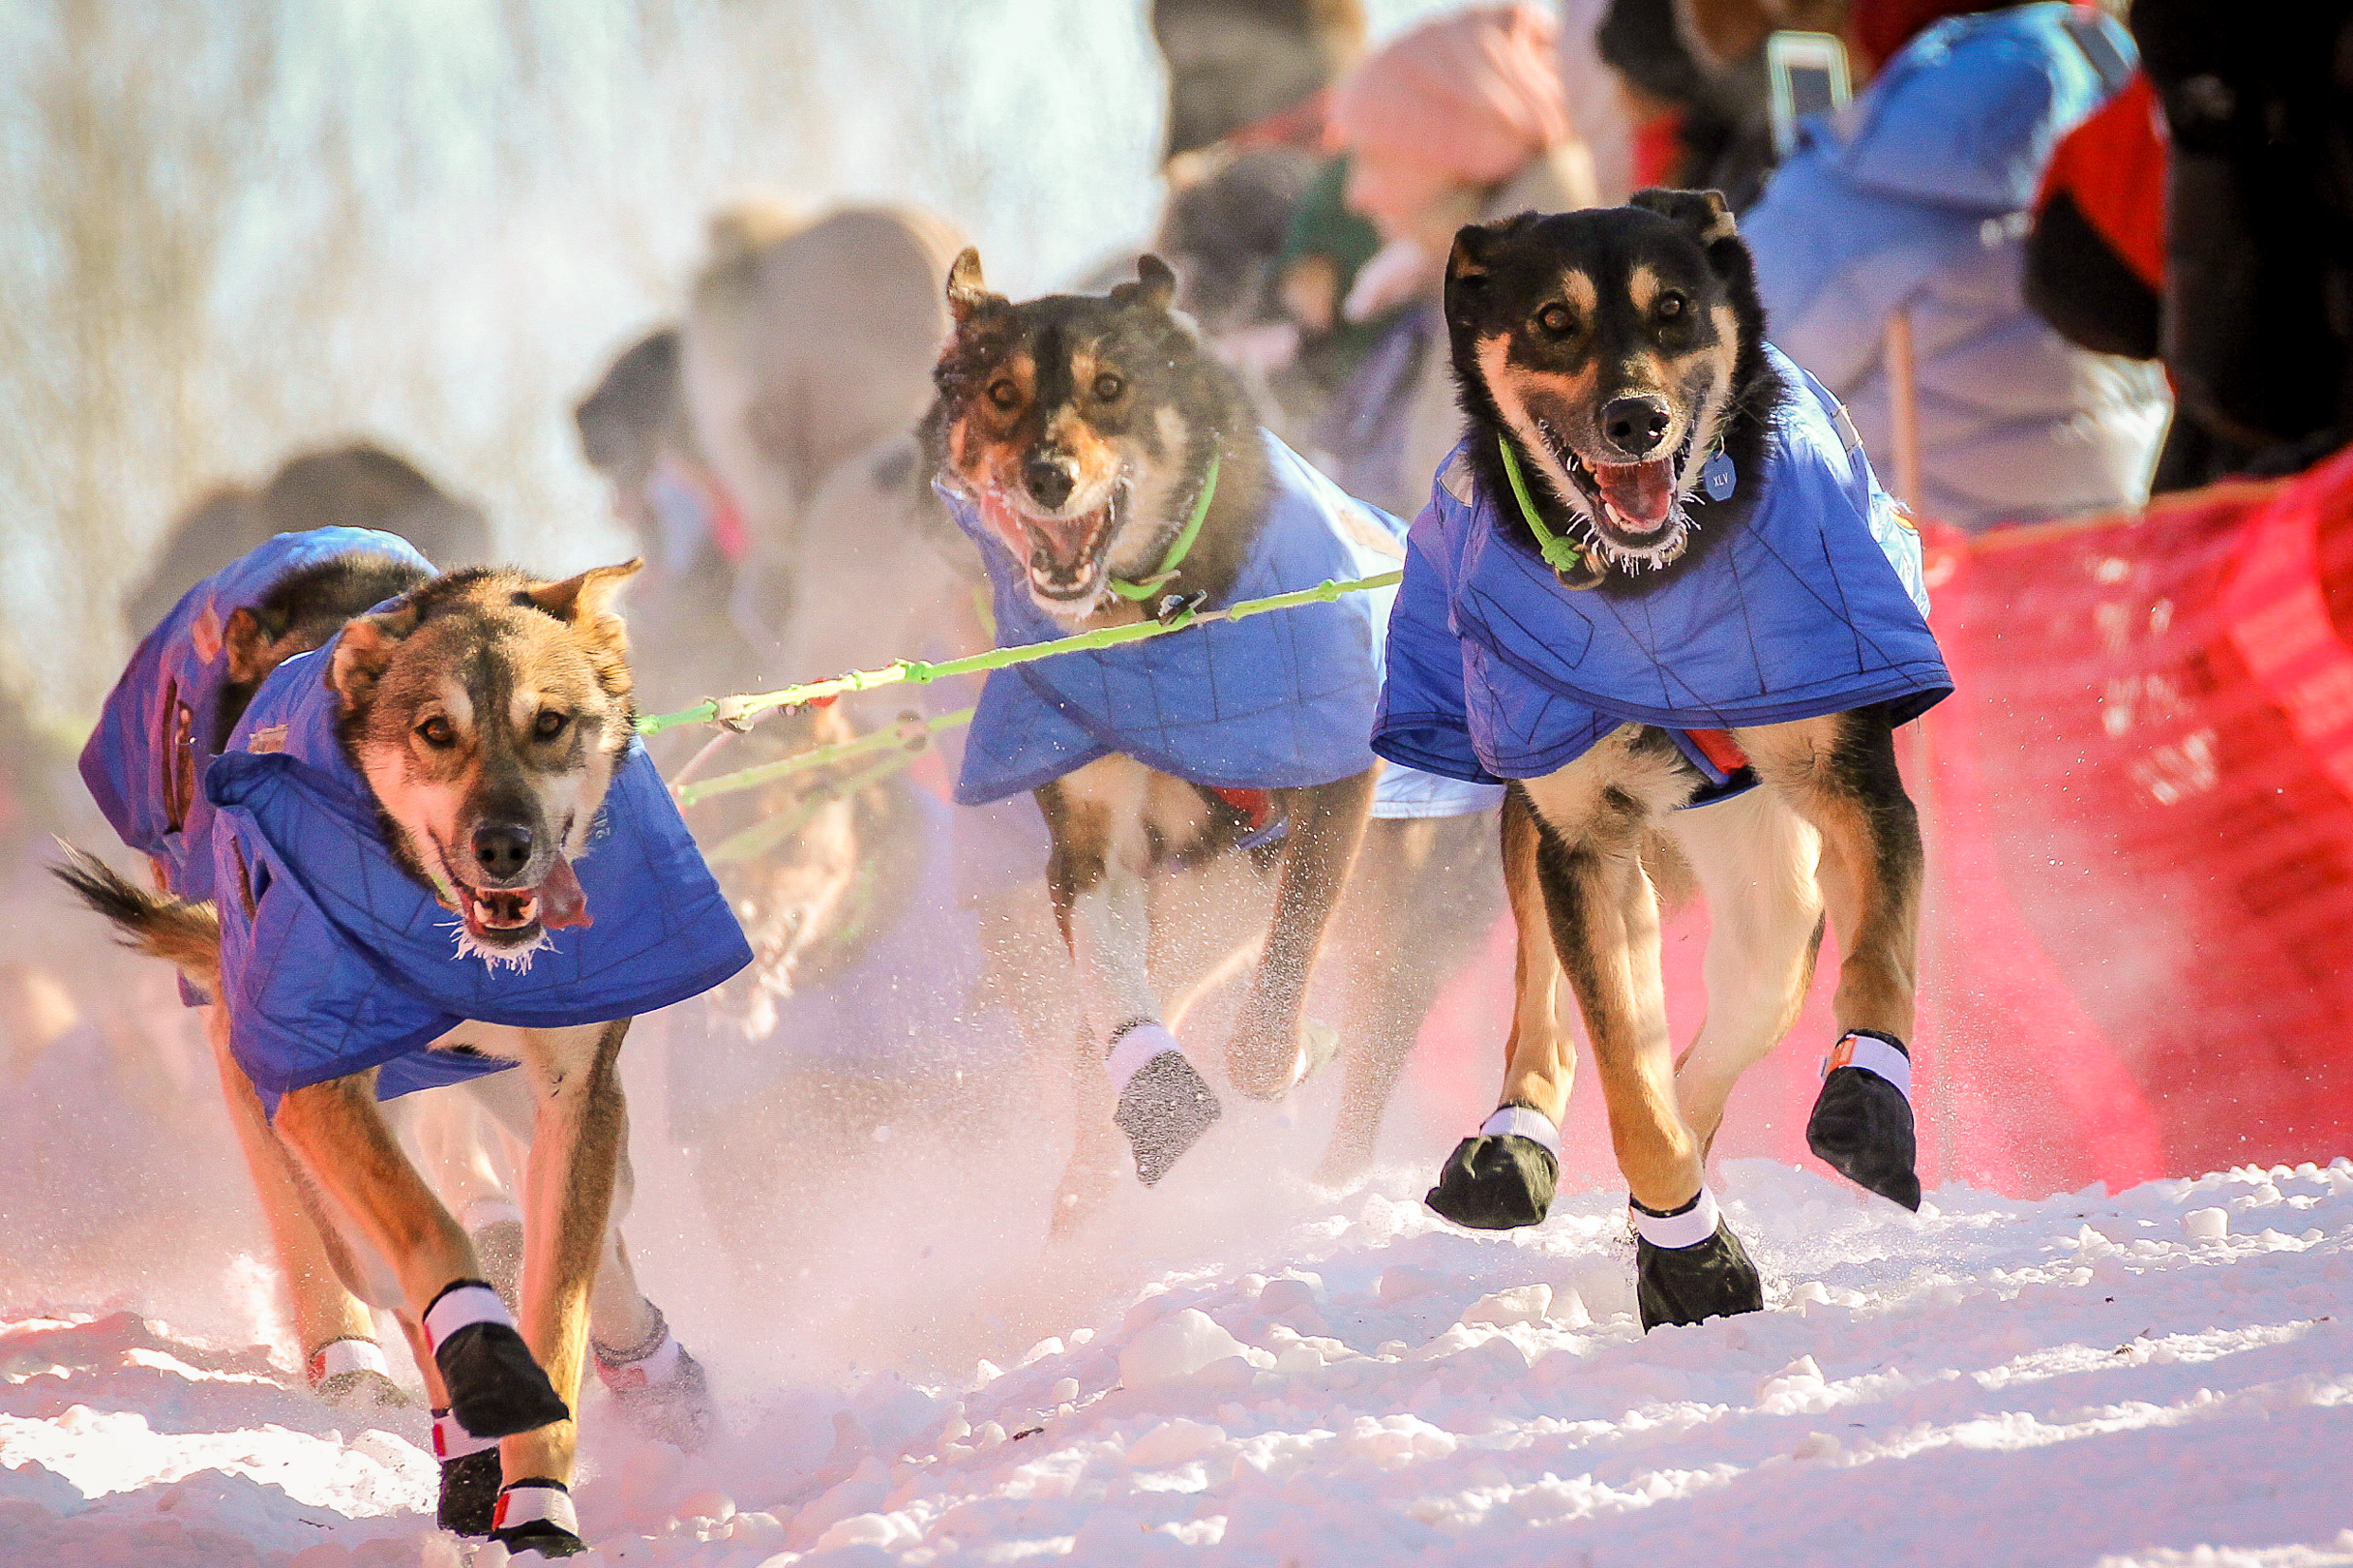 The 2021 Iditarod sled dog race is still on, but will end in Willow